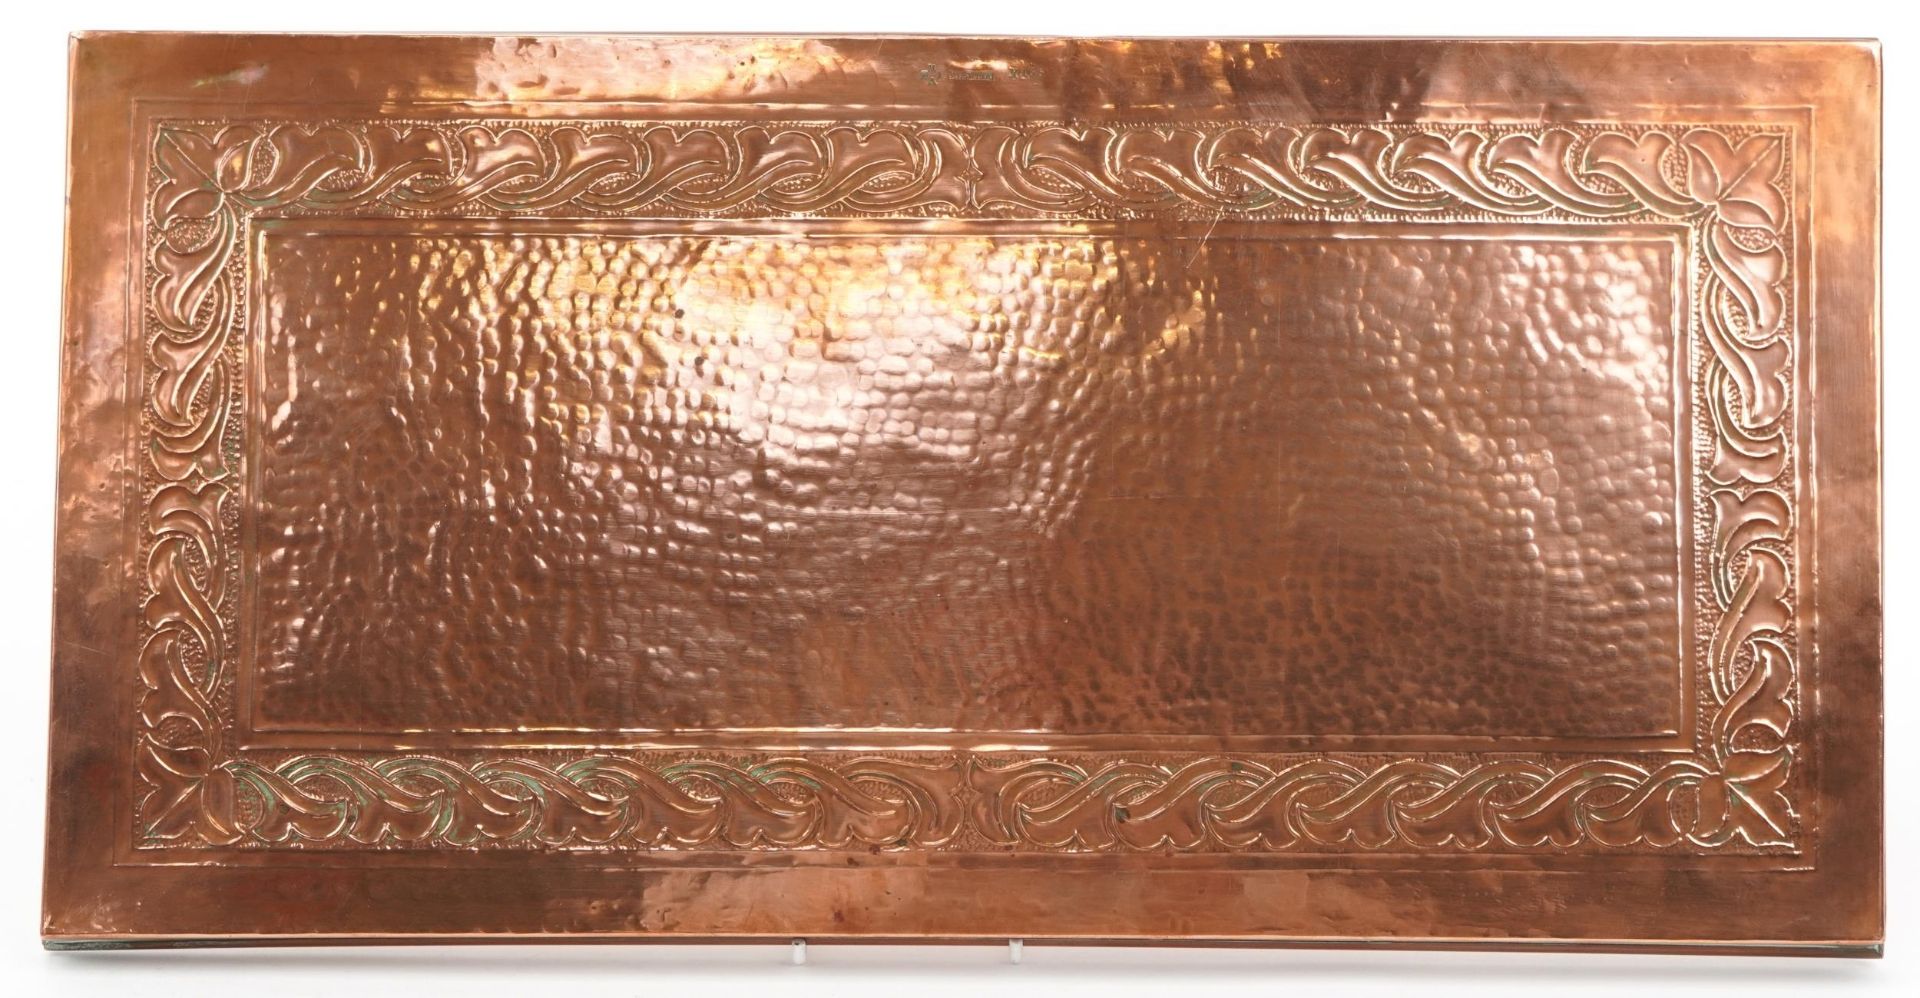 Keswick, Arts & Crafts beaten copper train engraved with stylised foliage, impressed marks to the - Image 2 of 3